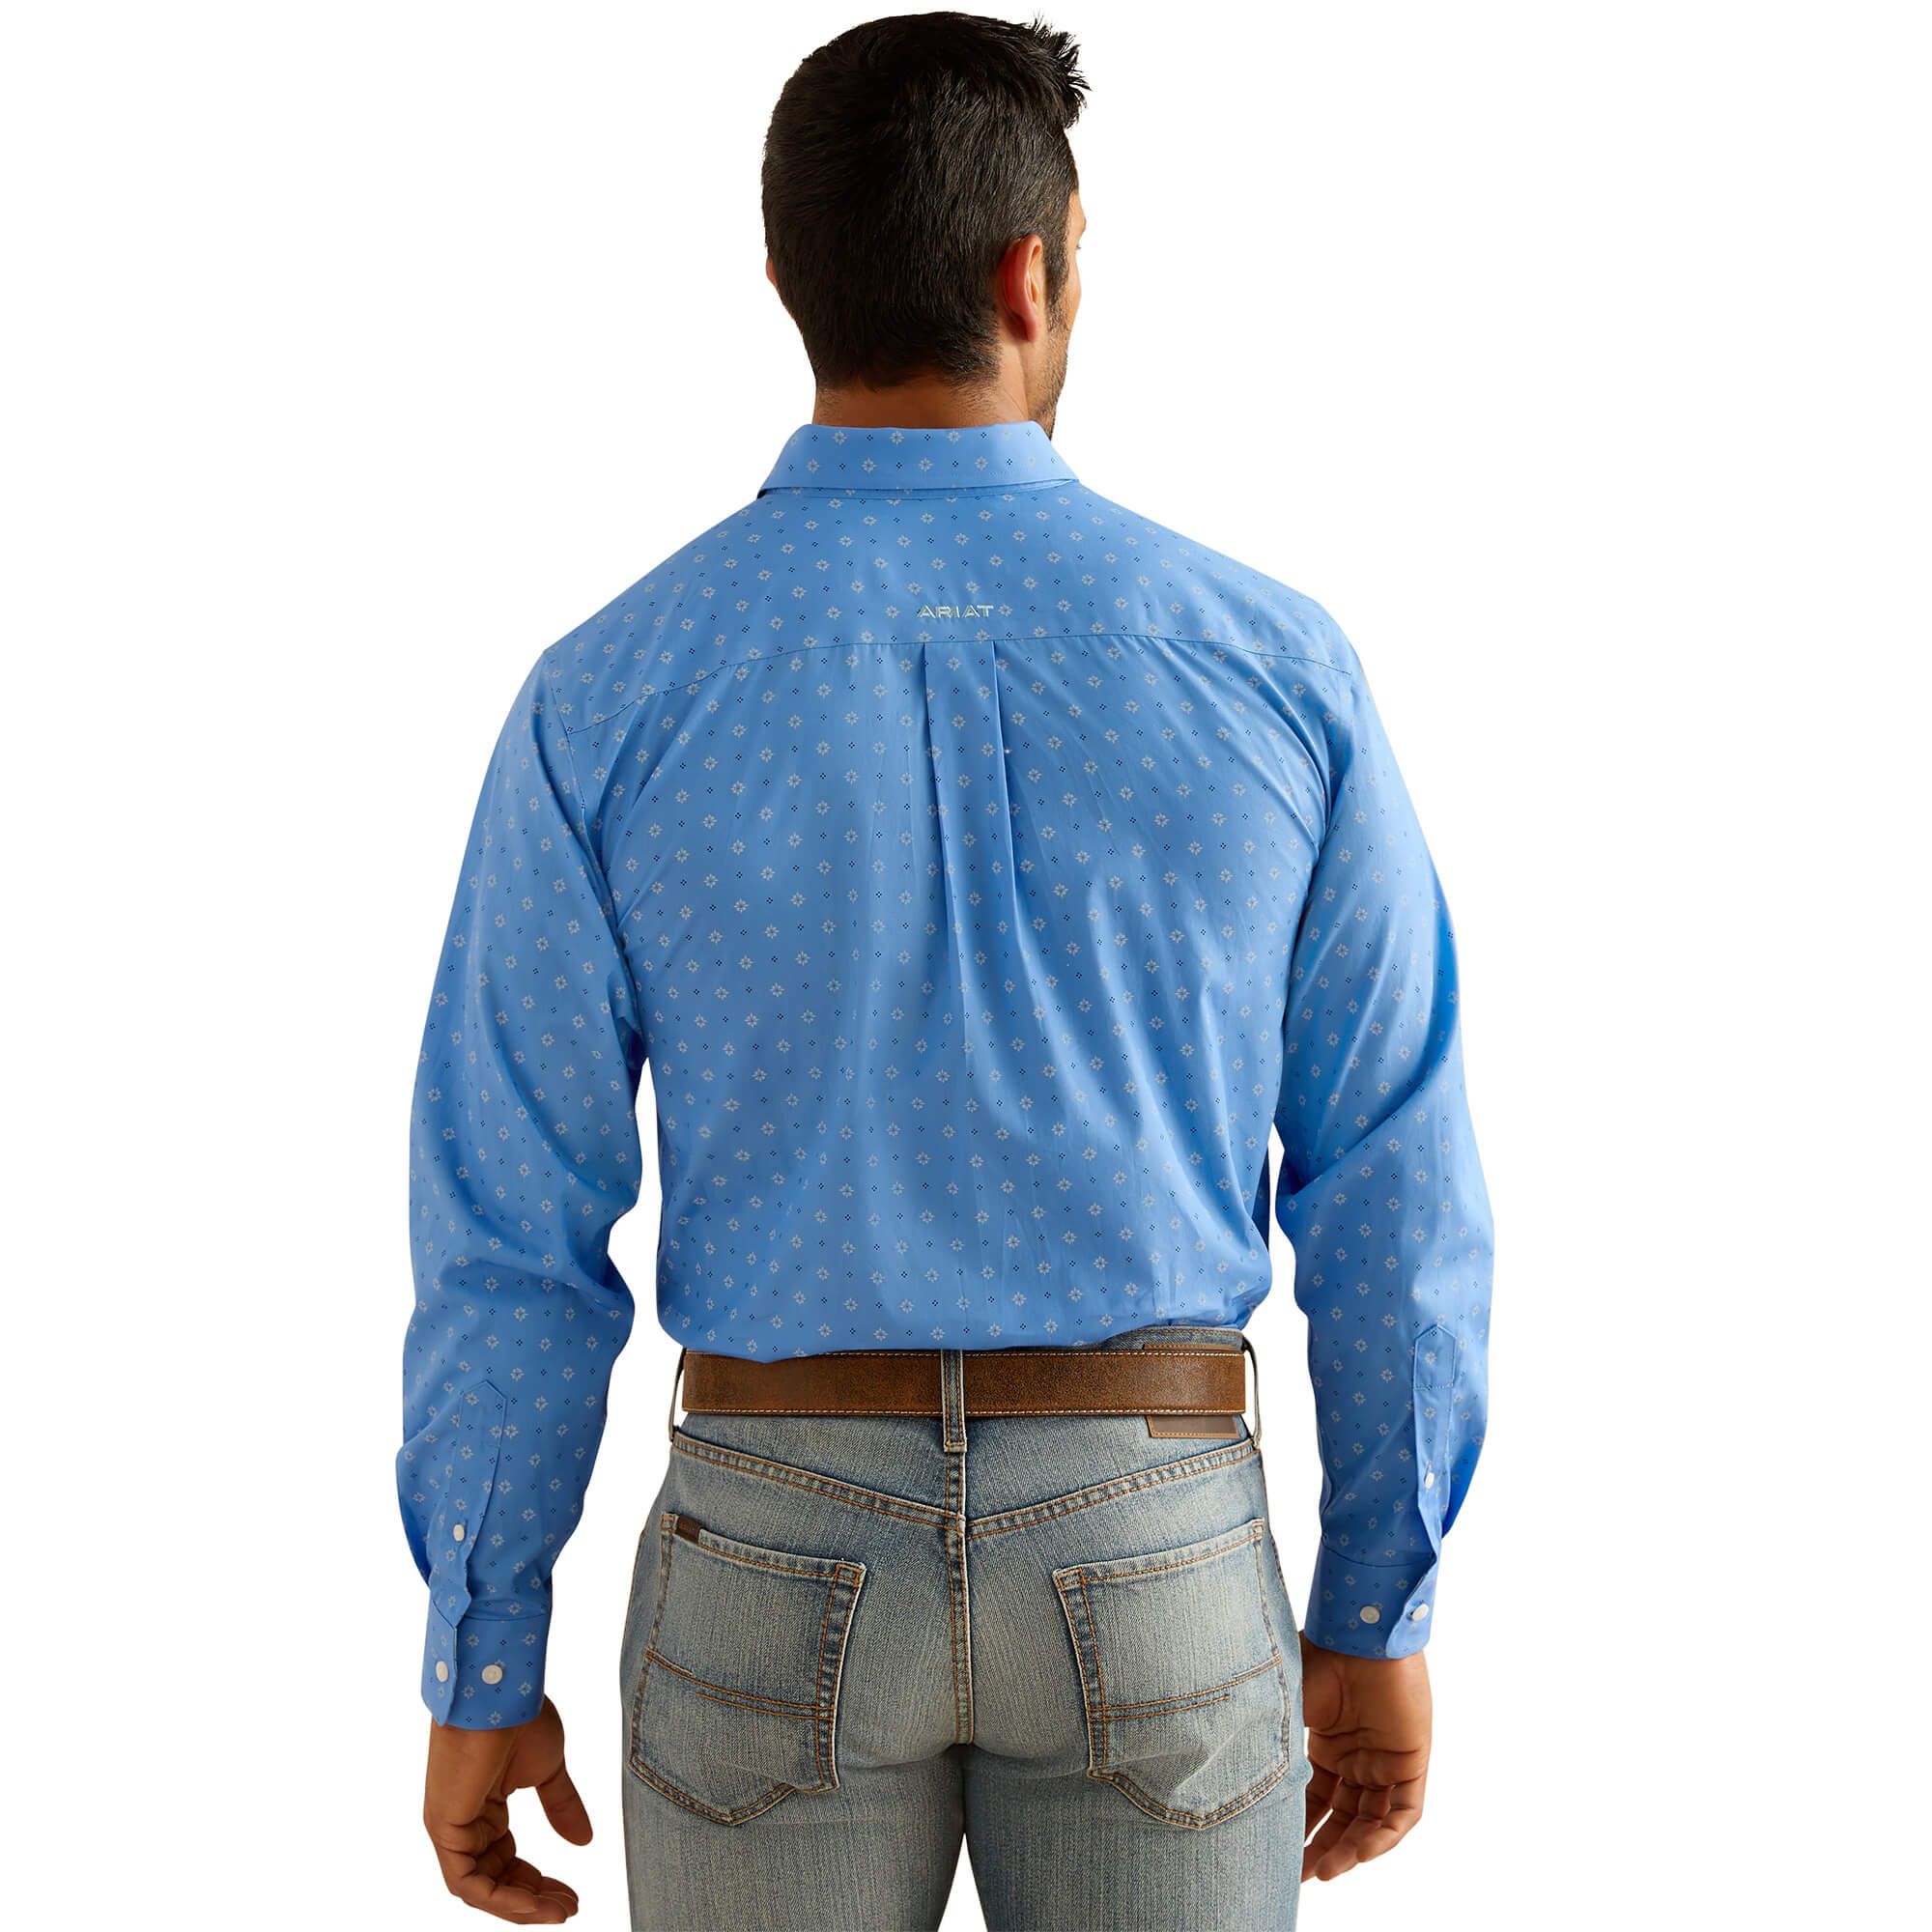 Ariat Russel Wrinkle Free Fitted Shirt back view